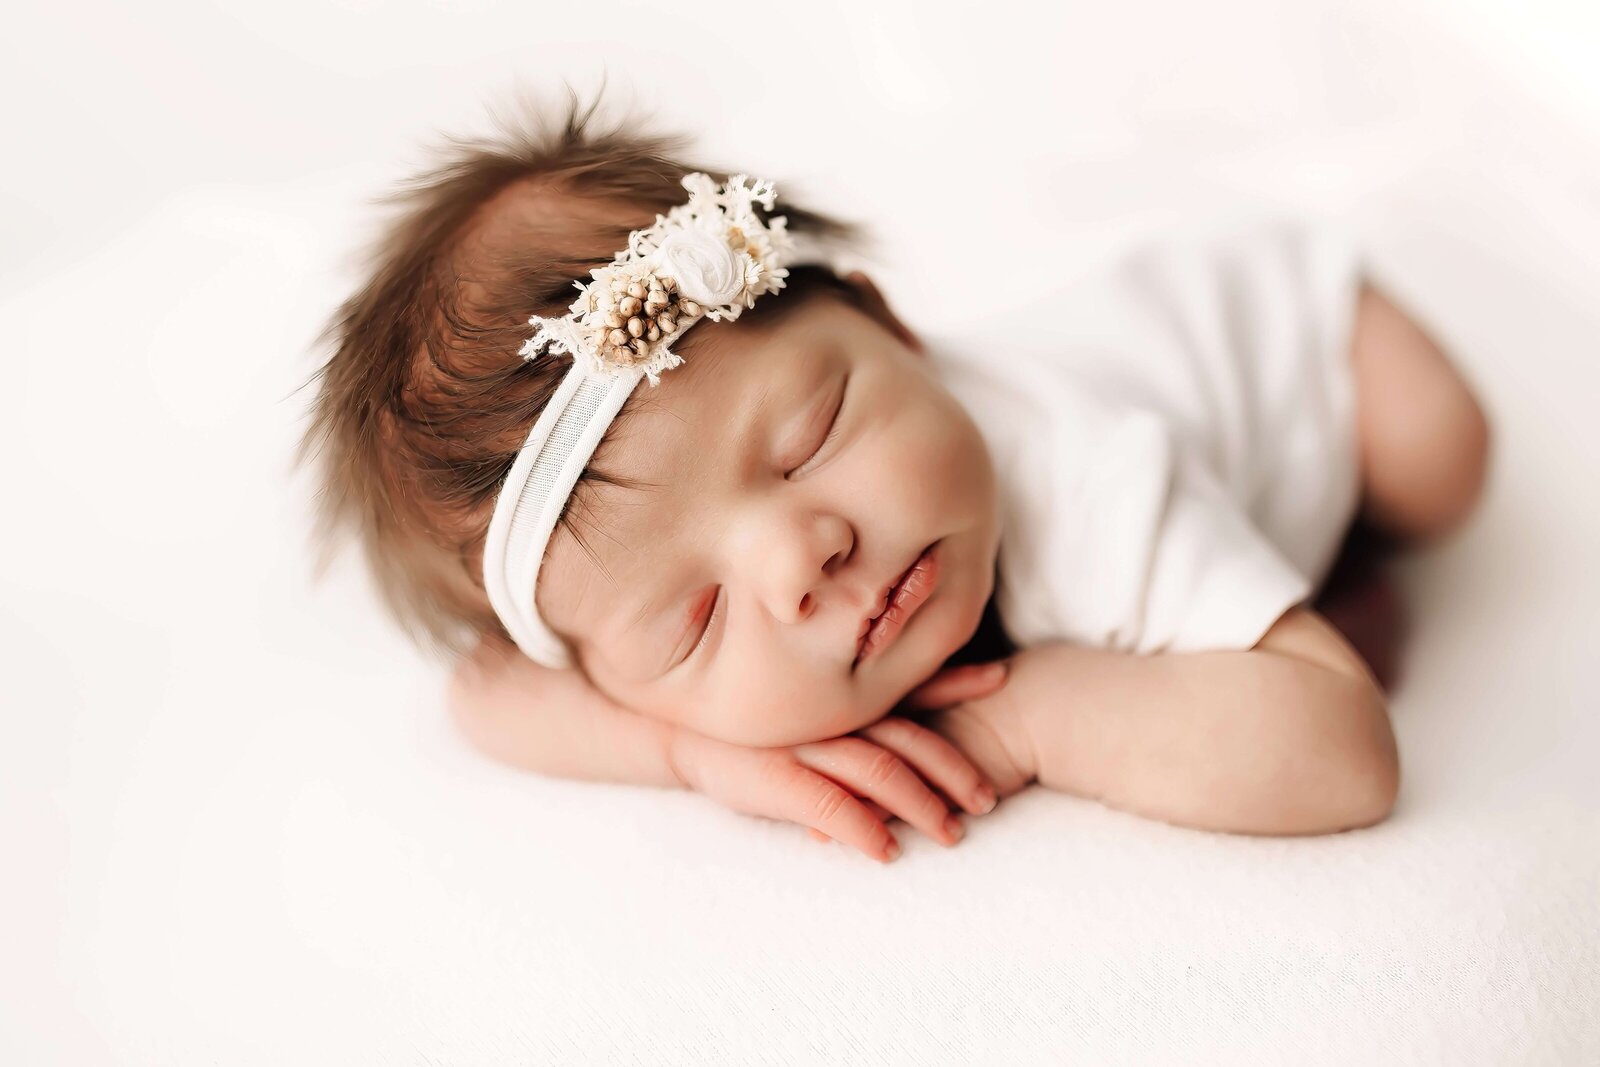 St_Louis_Newborn_Photographer_Kelly_Laramore_Photography_123-Recovered